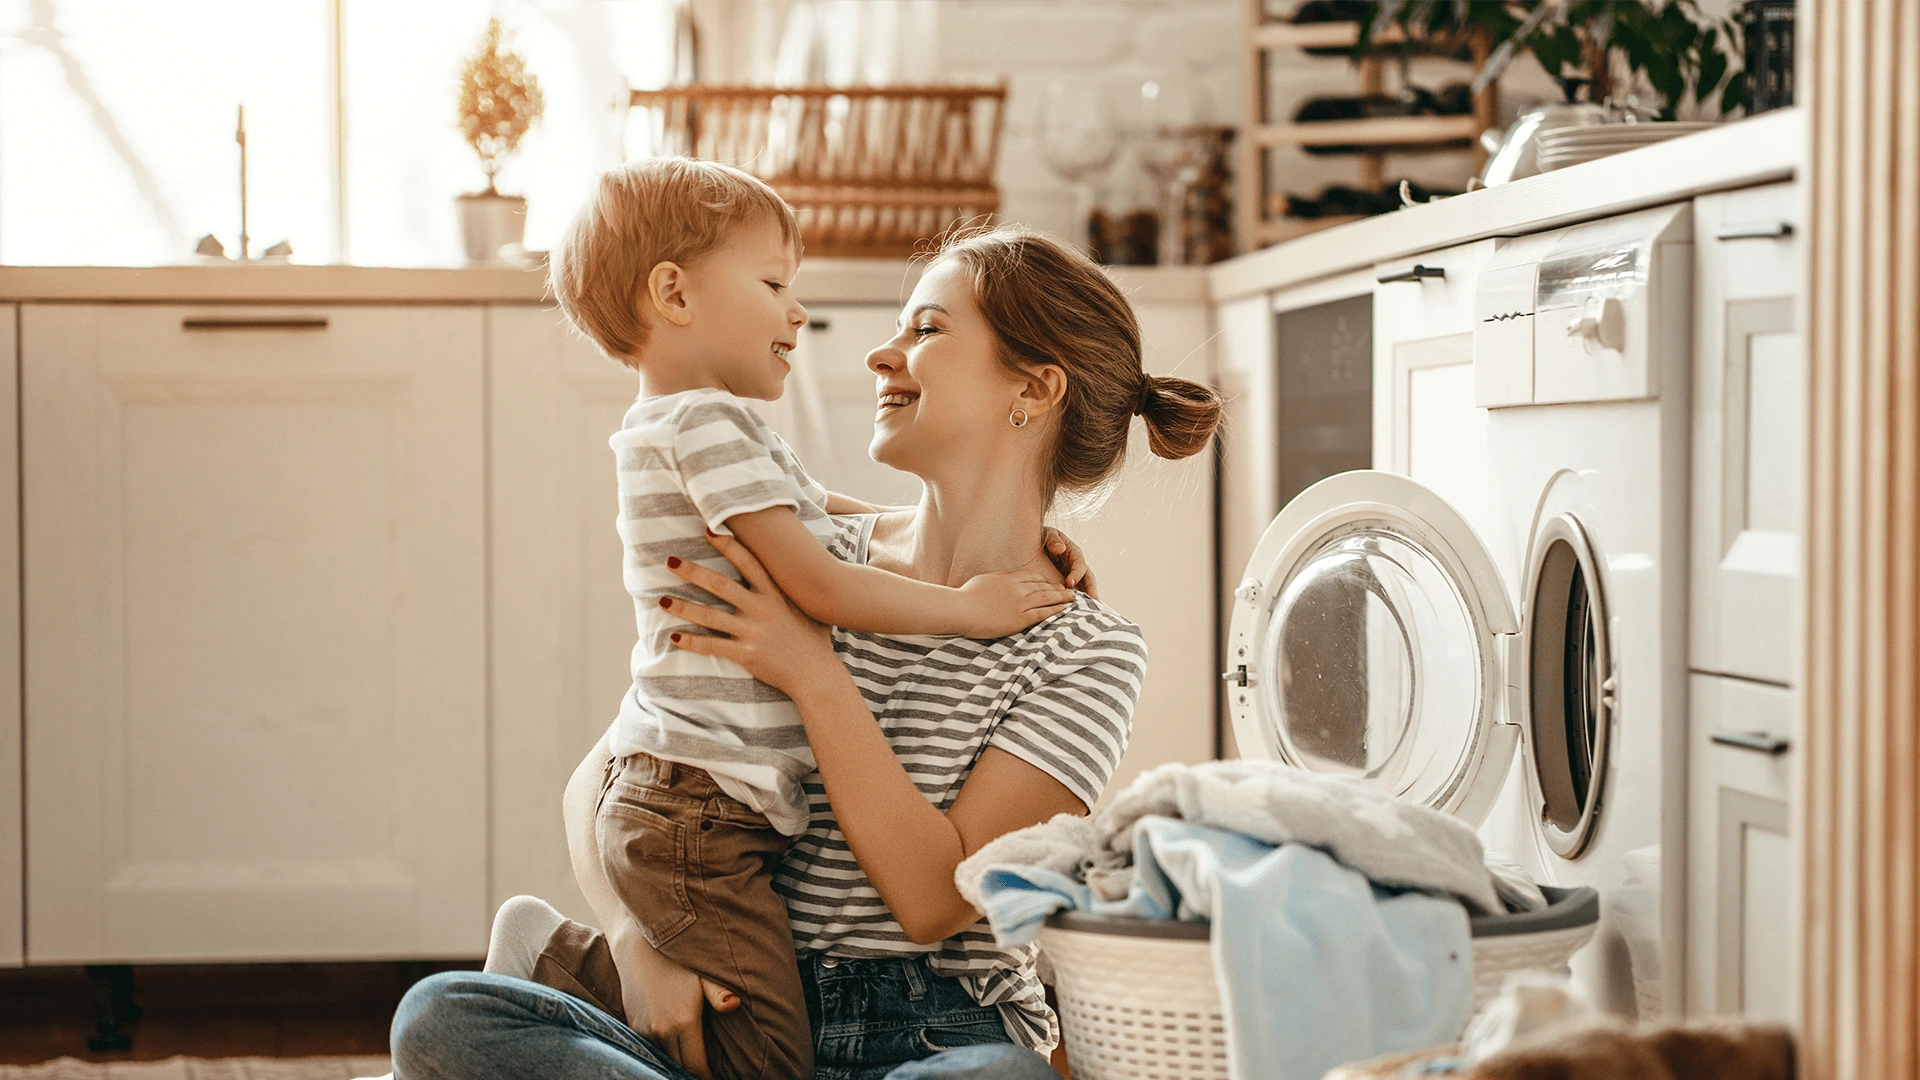 A mother holding her toddler in a laundry room, both smiling at each other, with a washing machine and laundry basket nearby.